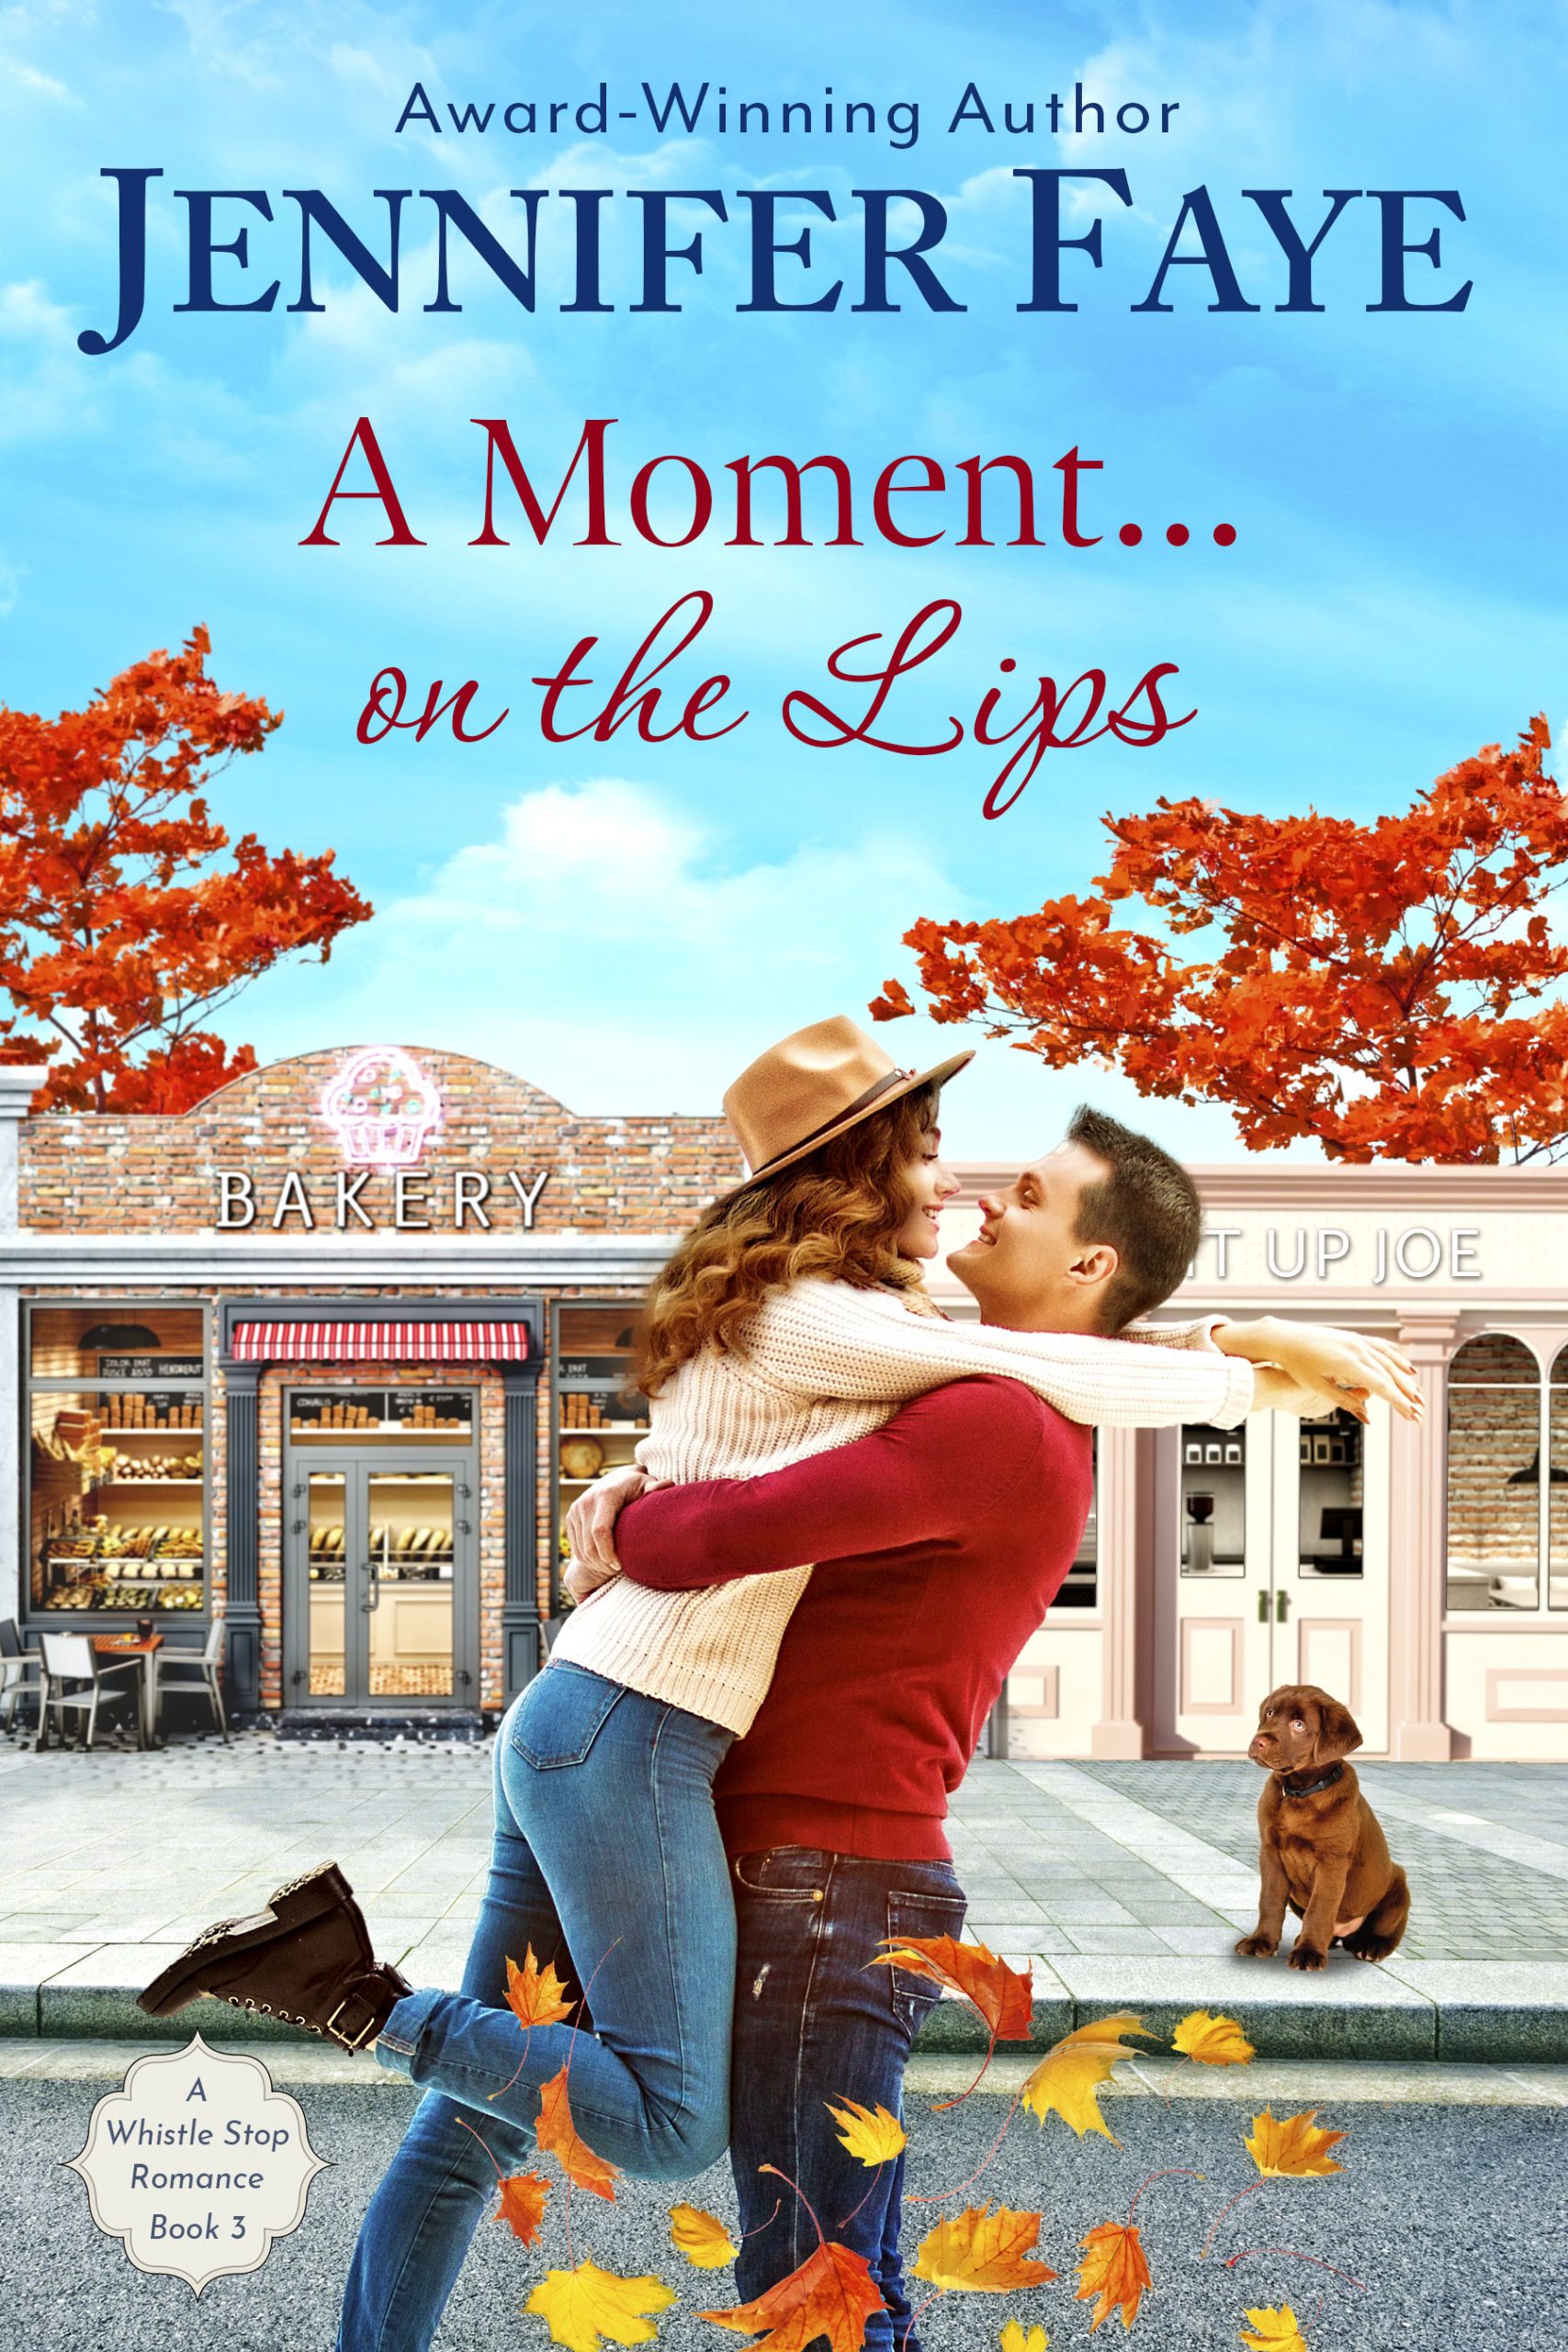 A moment on the lips